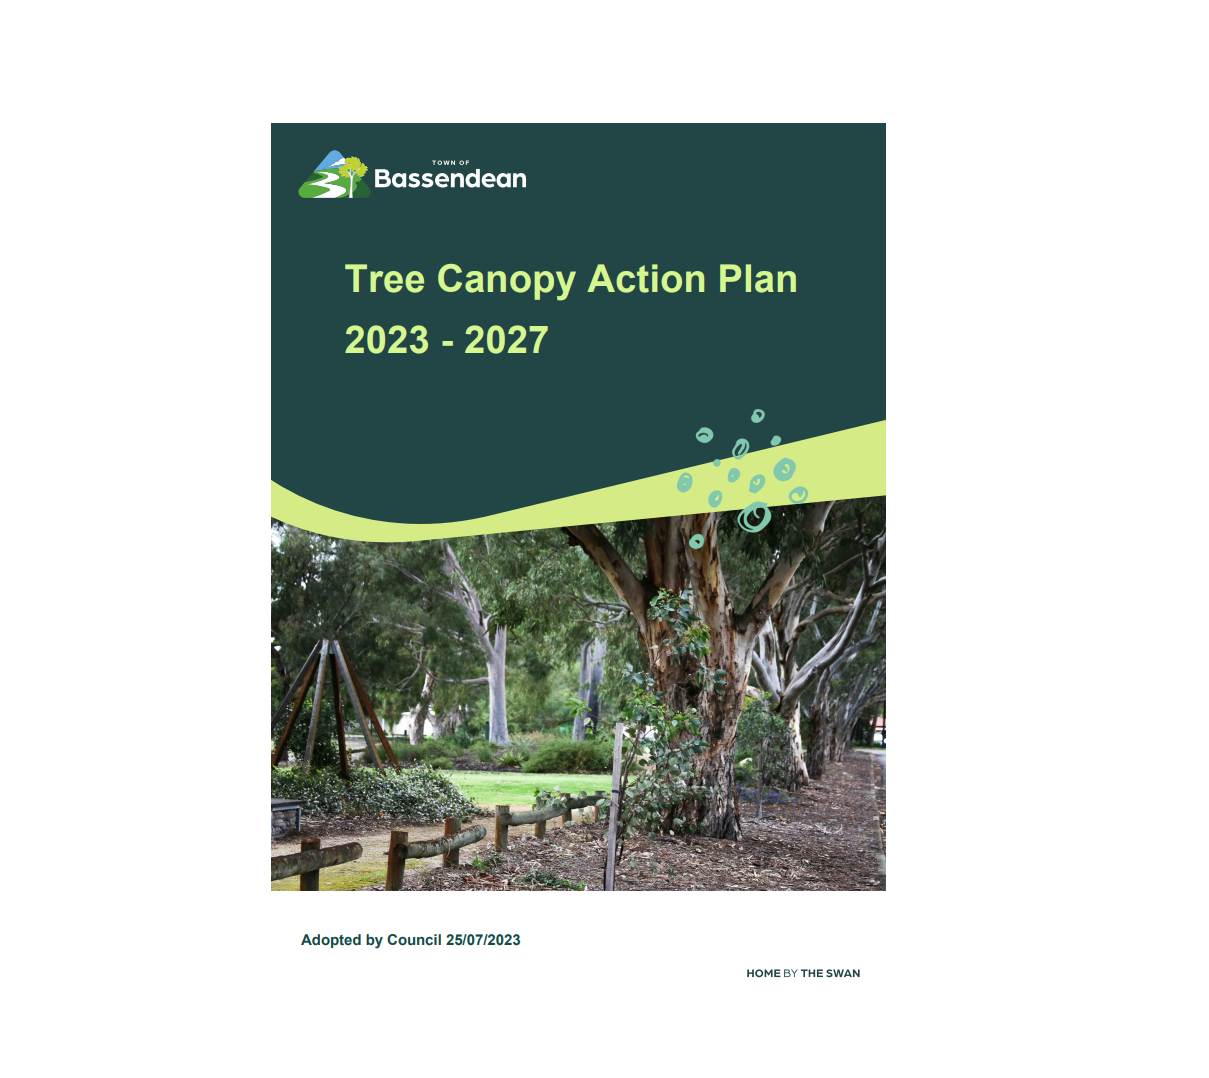 New Tree Canopy Action Plan